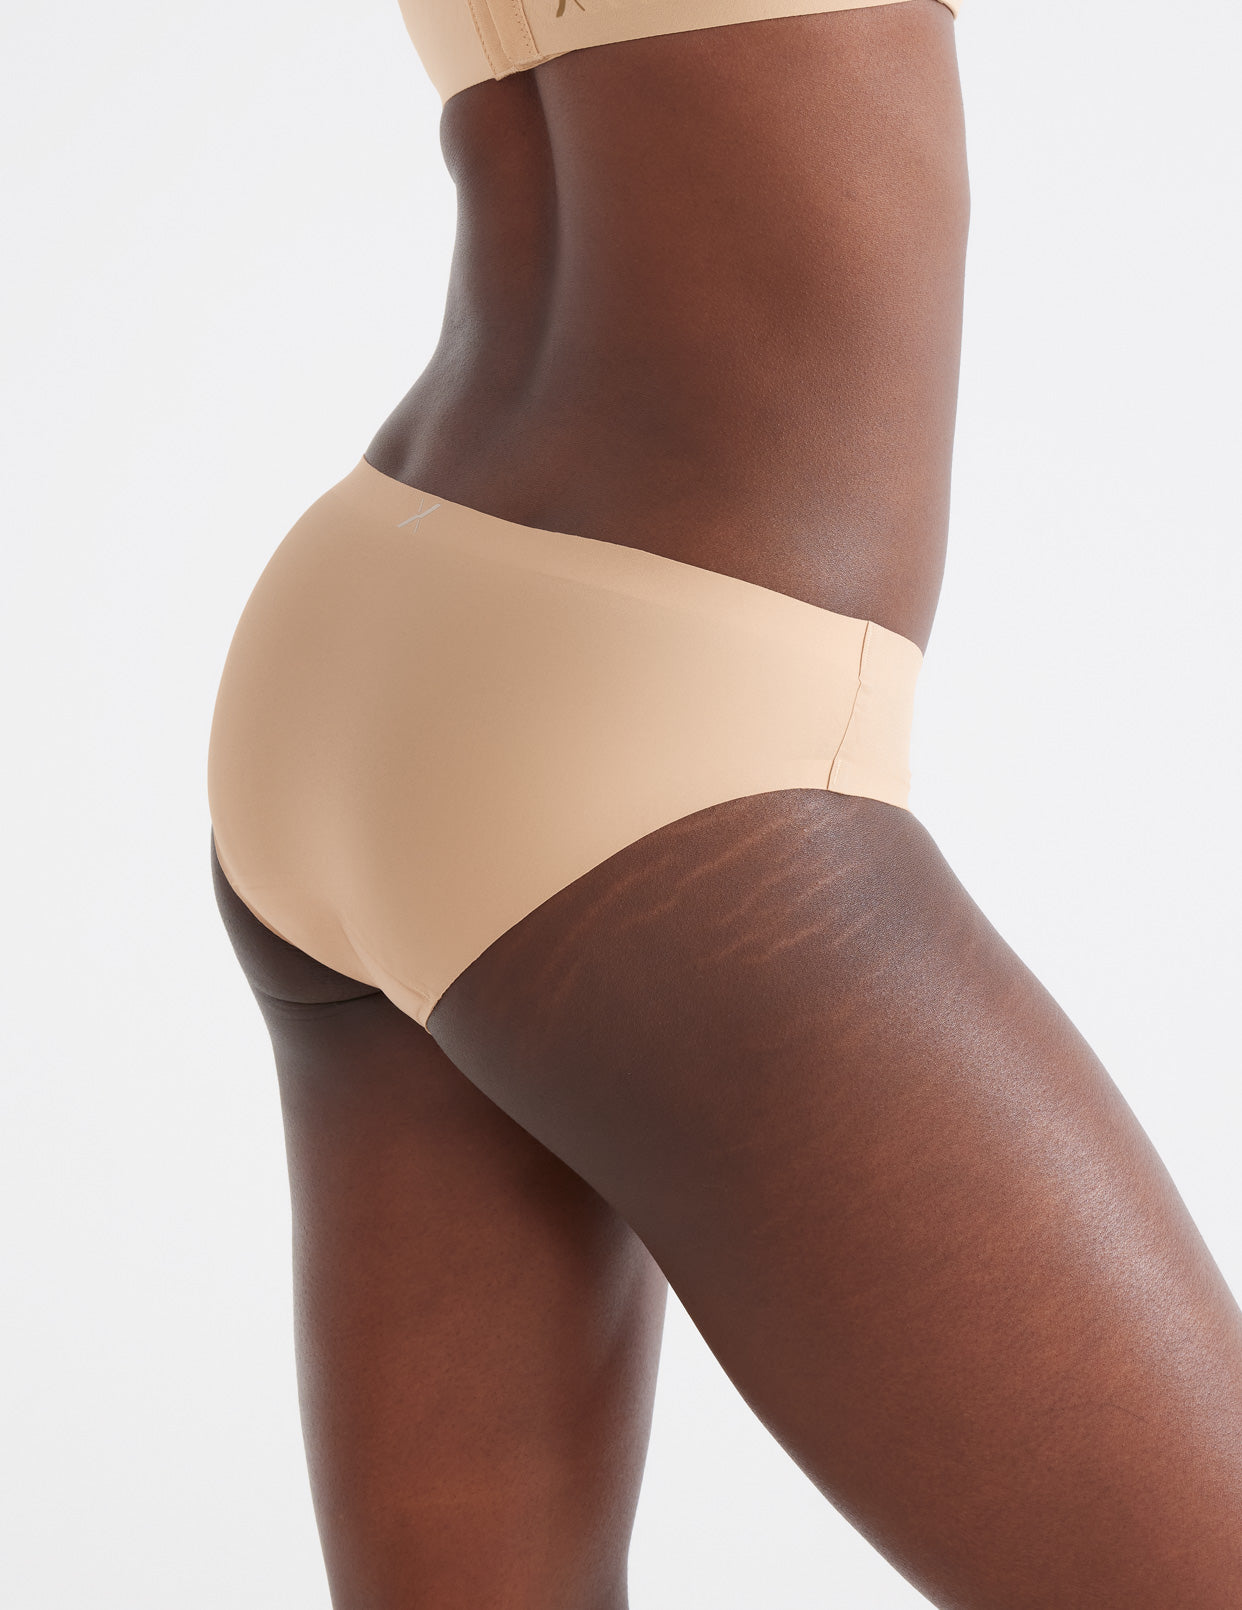 Period underwear maker Knix sparks conversations about perimenopause